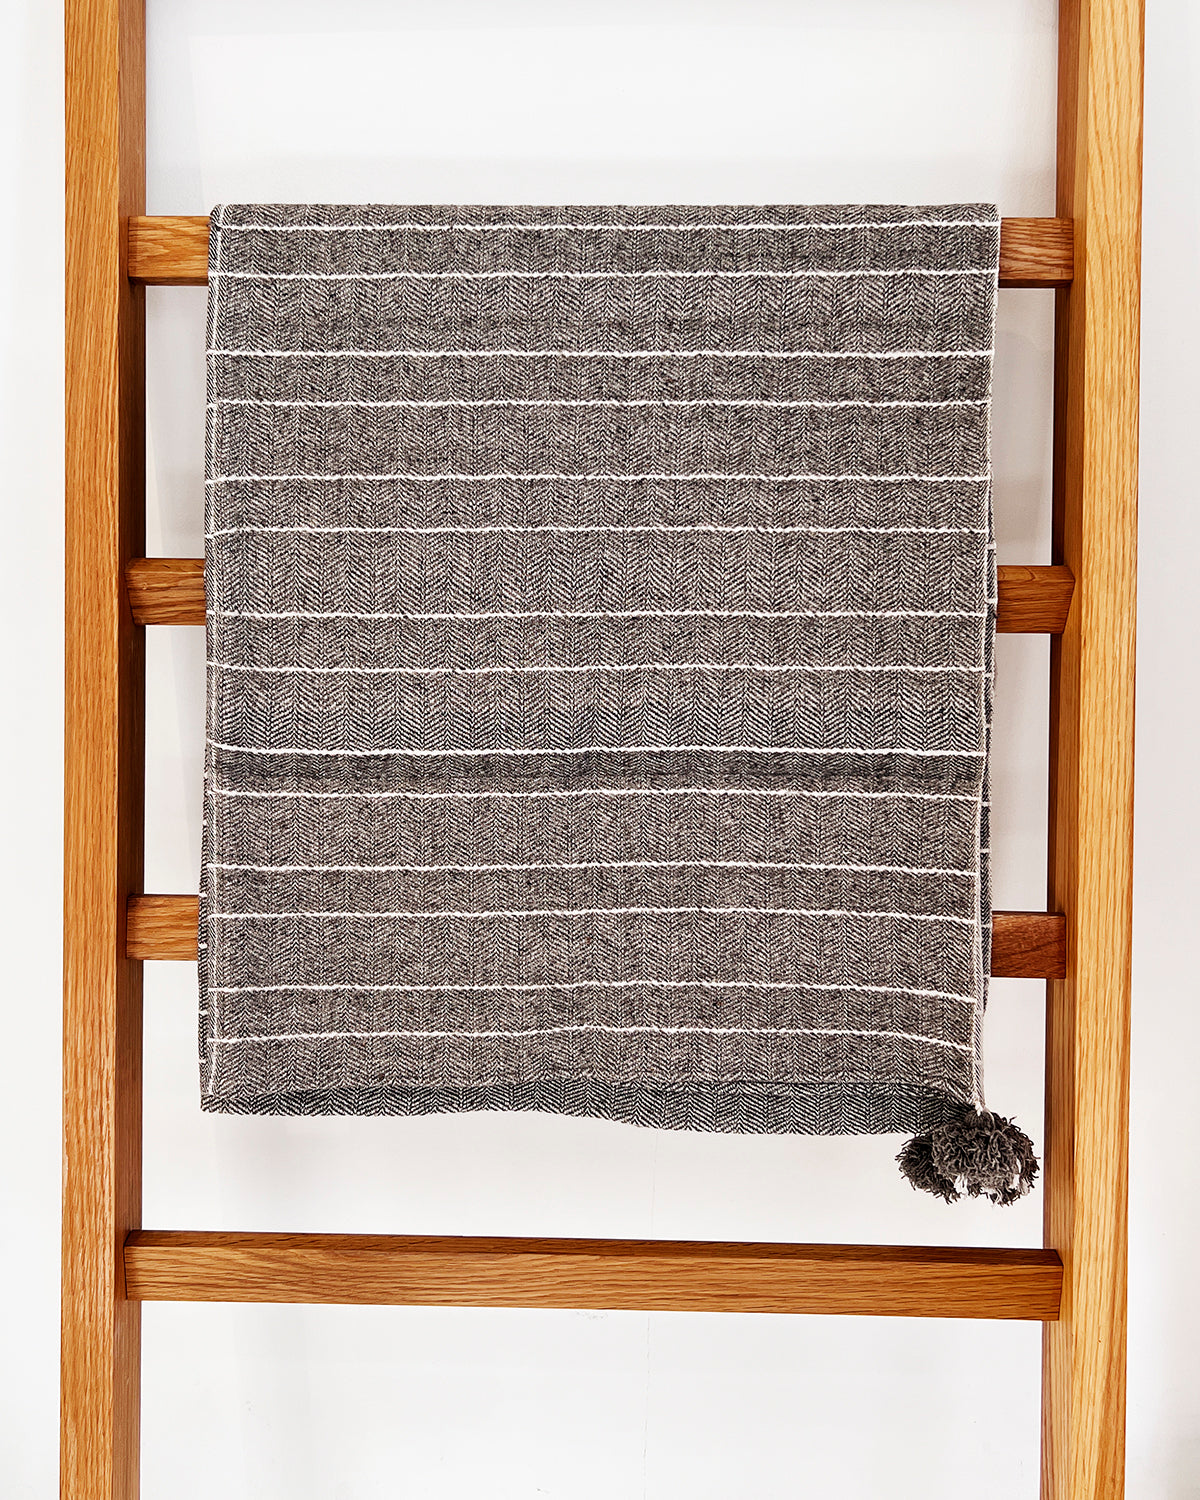 Tlahui Loomed Wool Throw in Gray and White